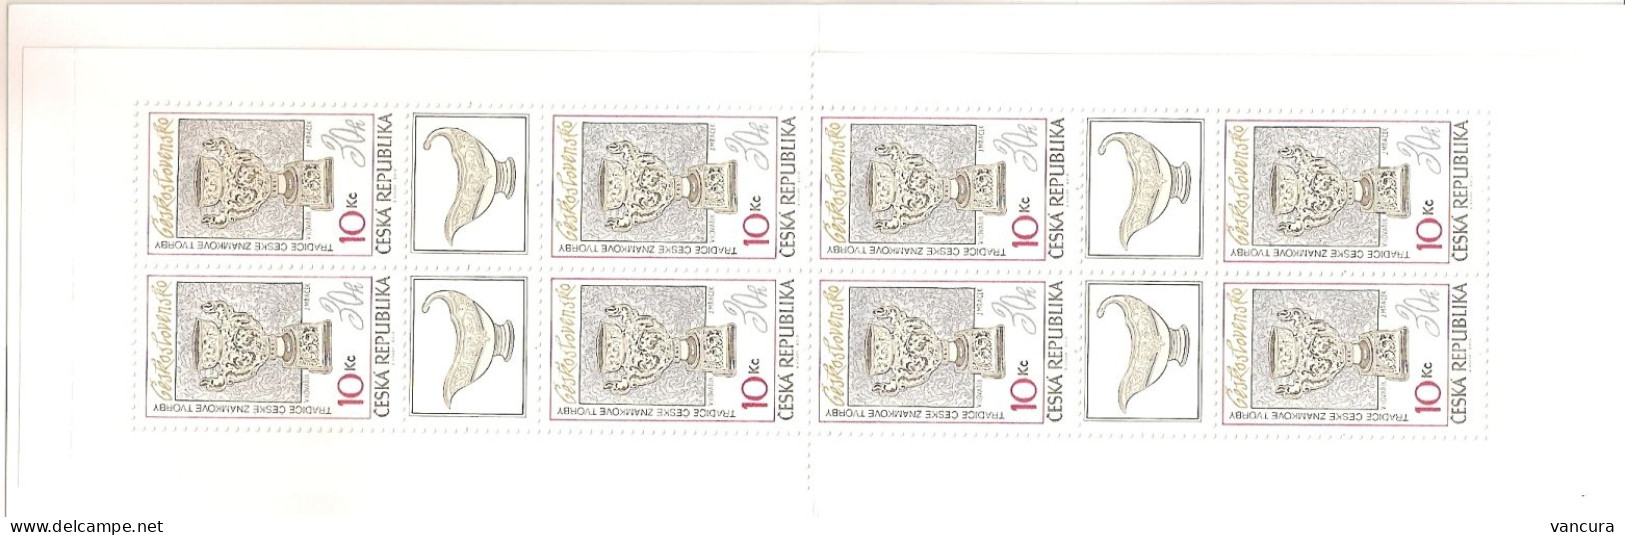 Booklet 619 Czech Republic Traditions Of The Czech Stamp Design 2010 Stamps On Stamps - Porzellan